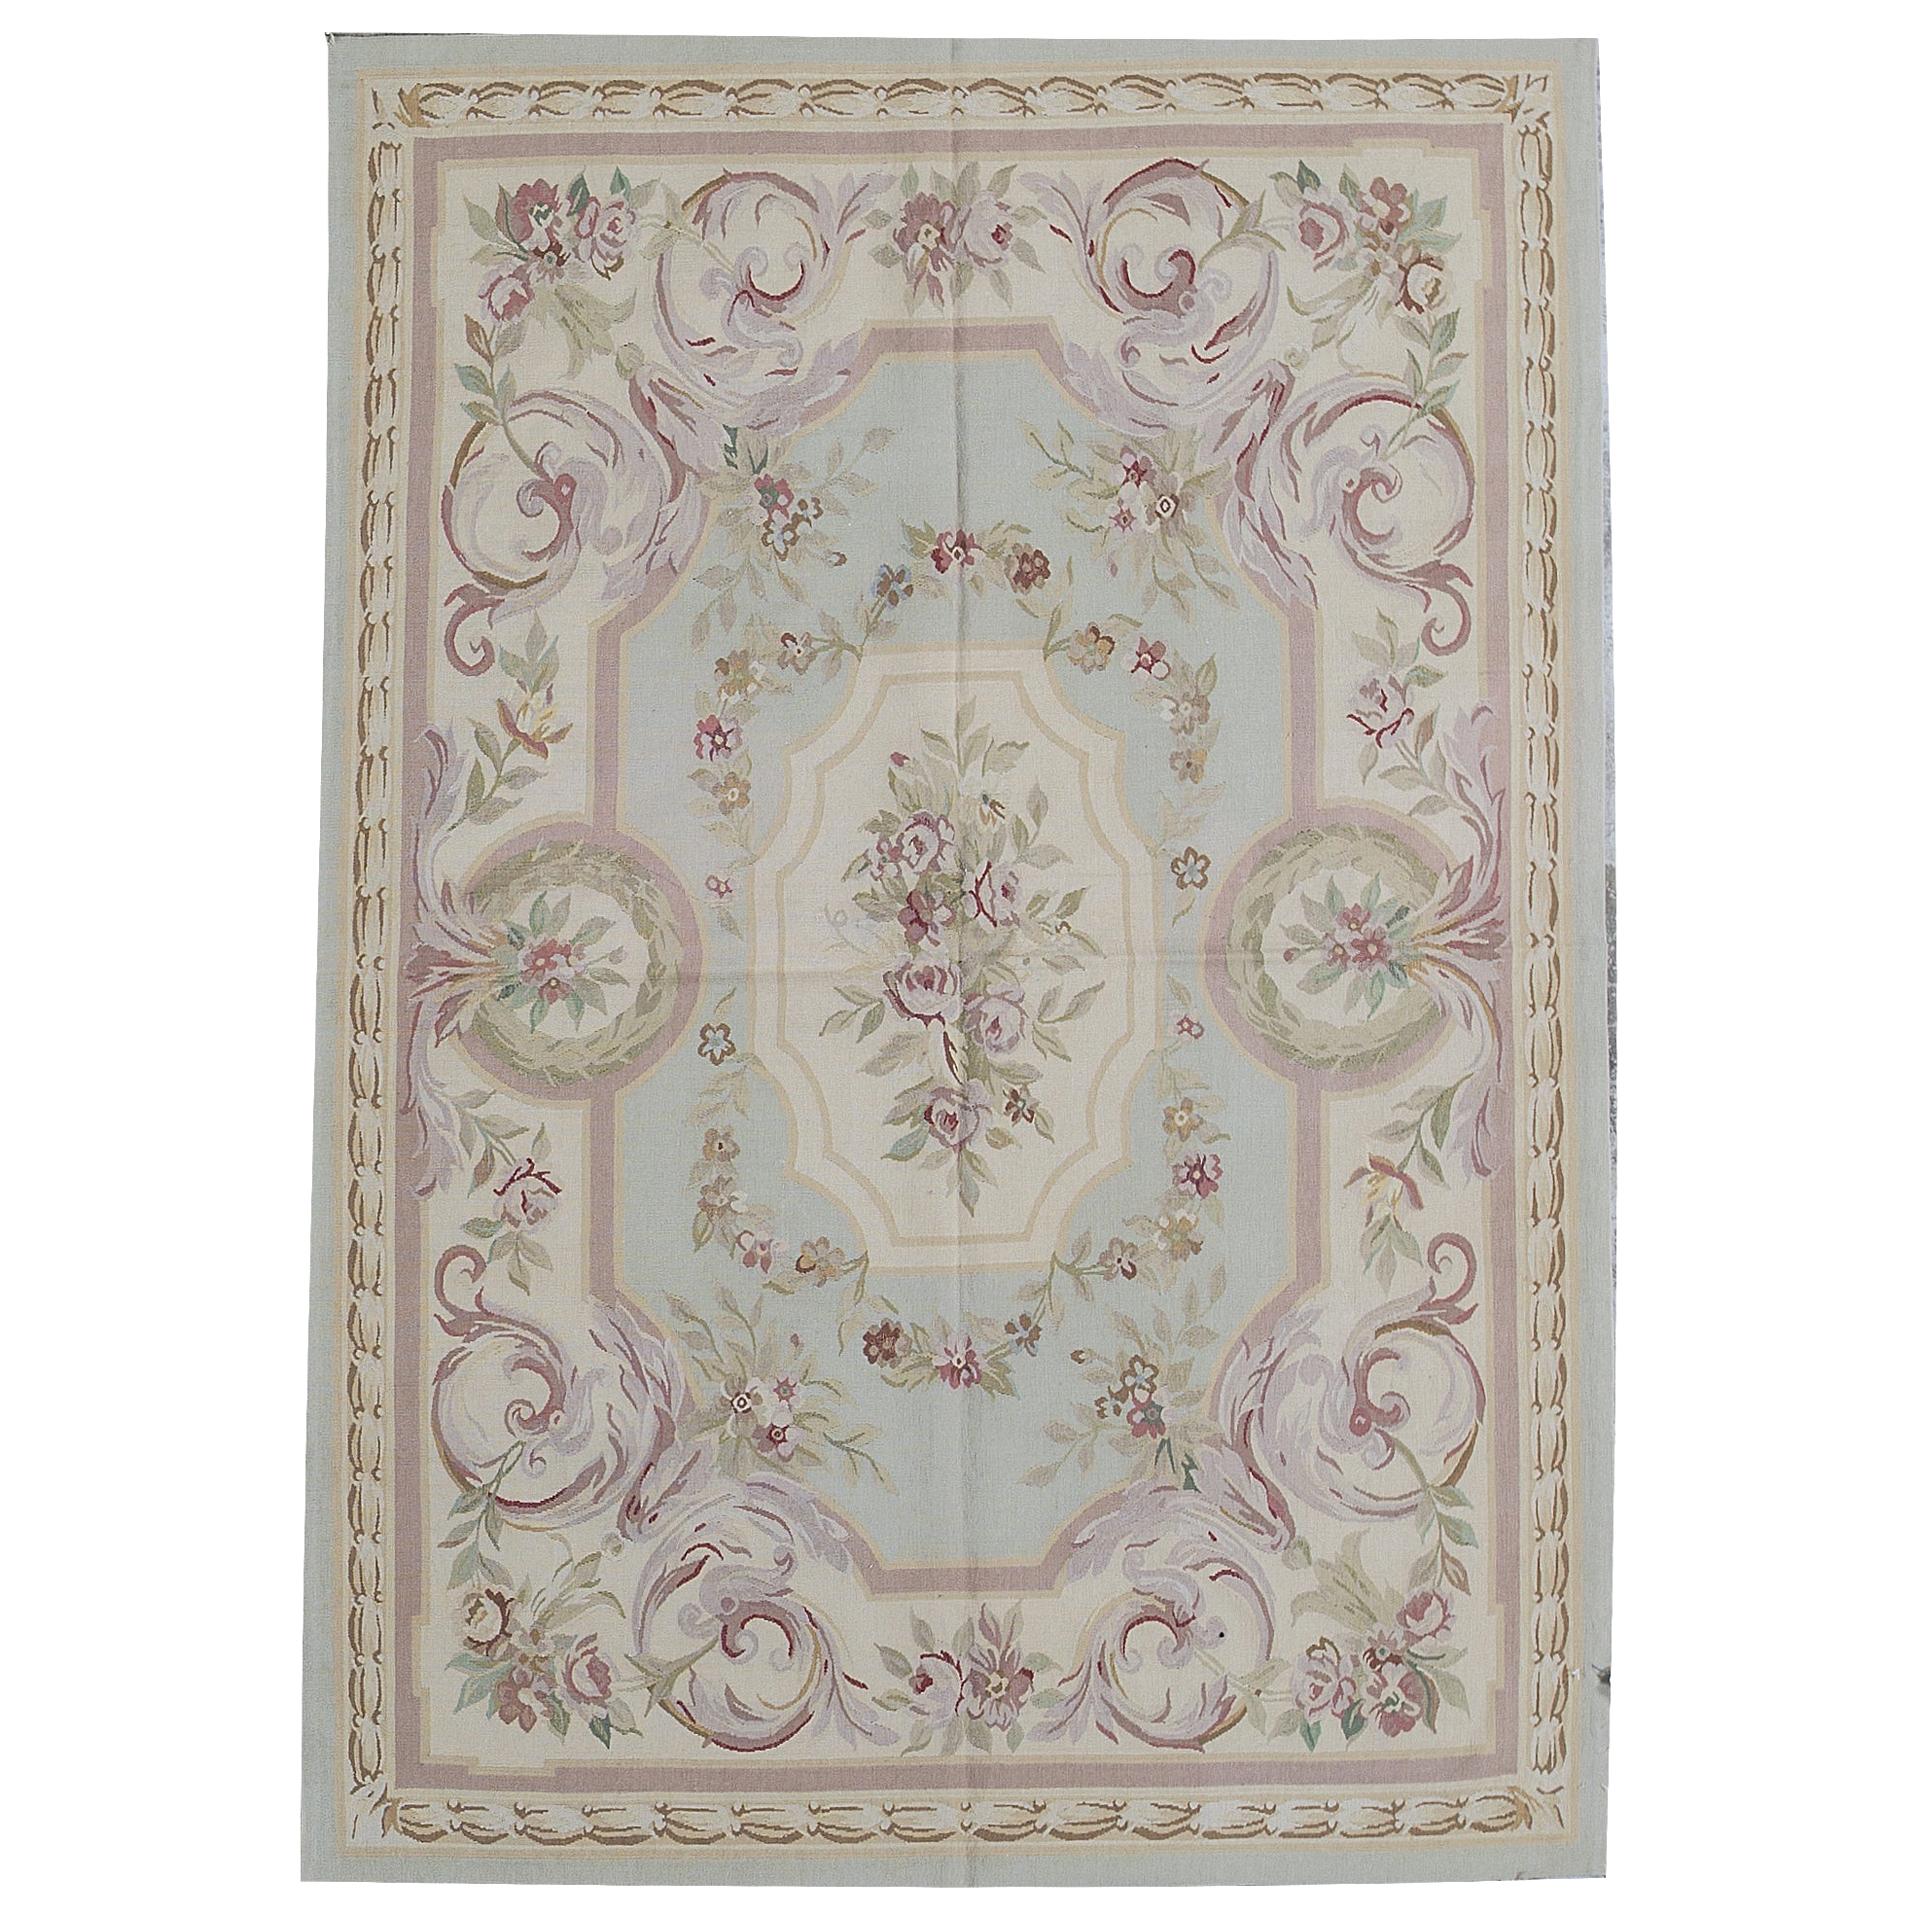 17th Century Traditional French Aubusson Style Flat-Weave Rug